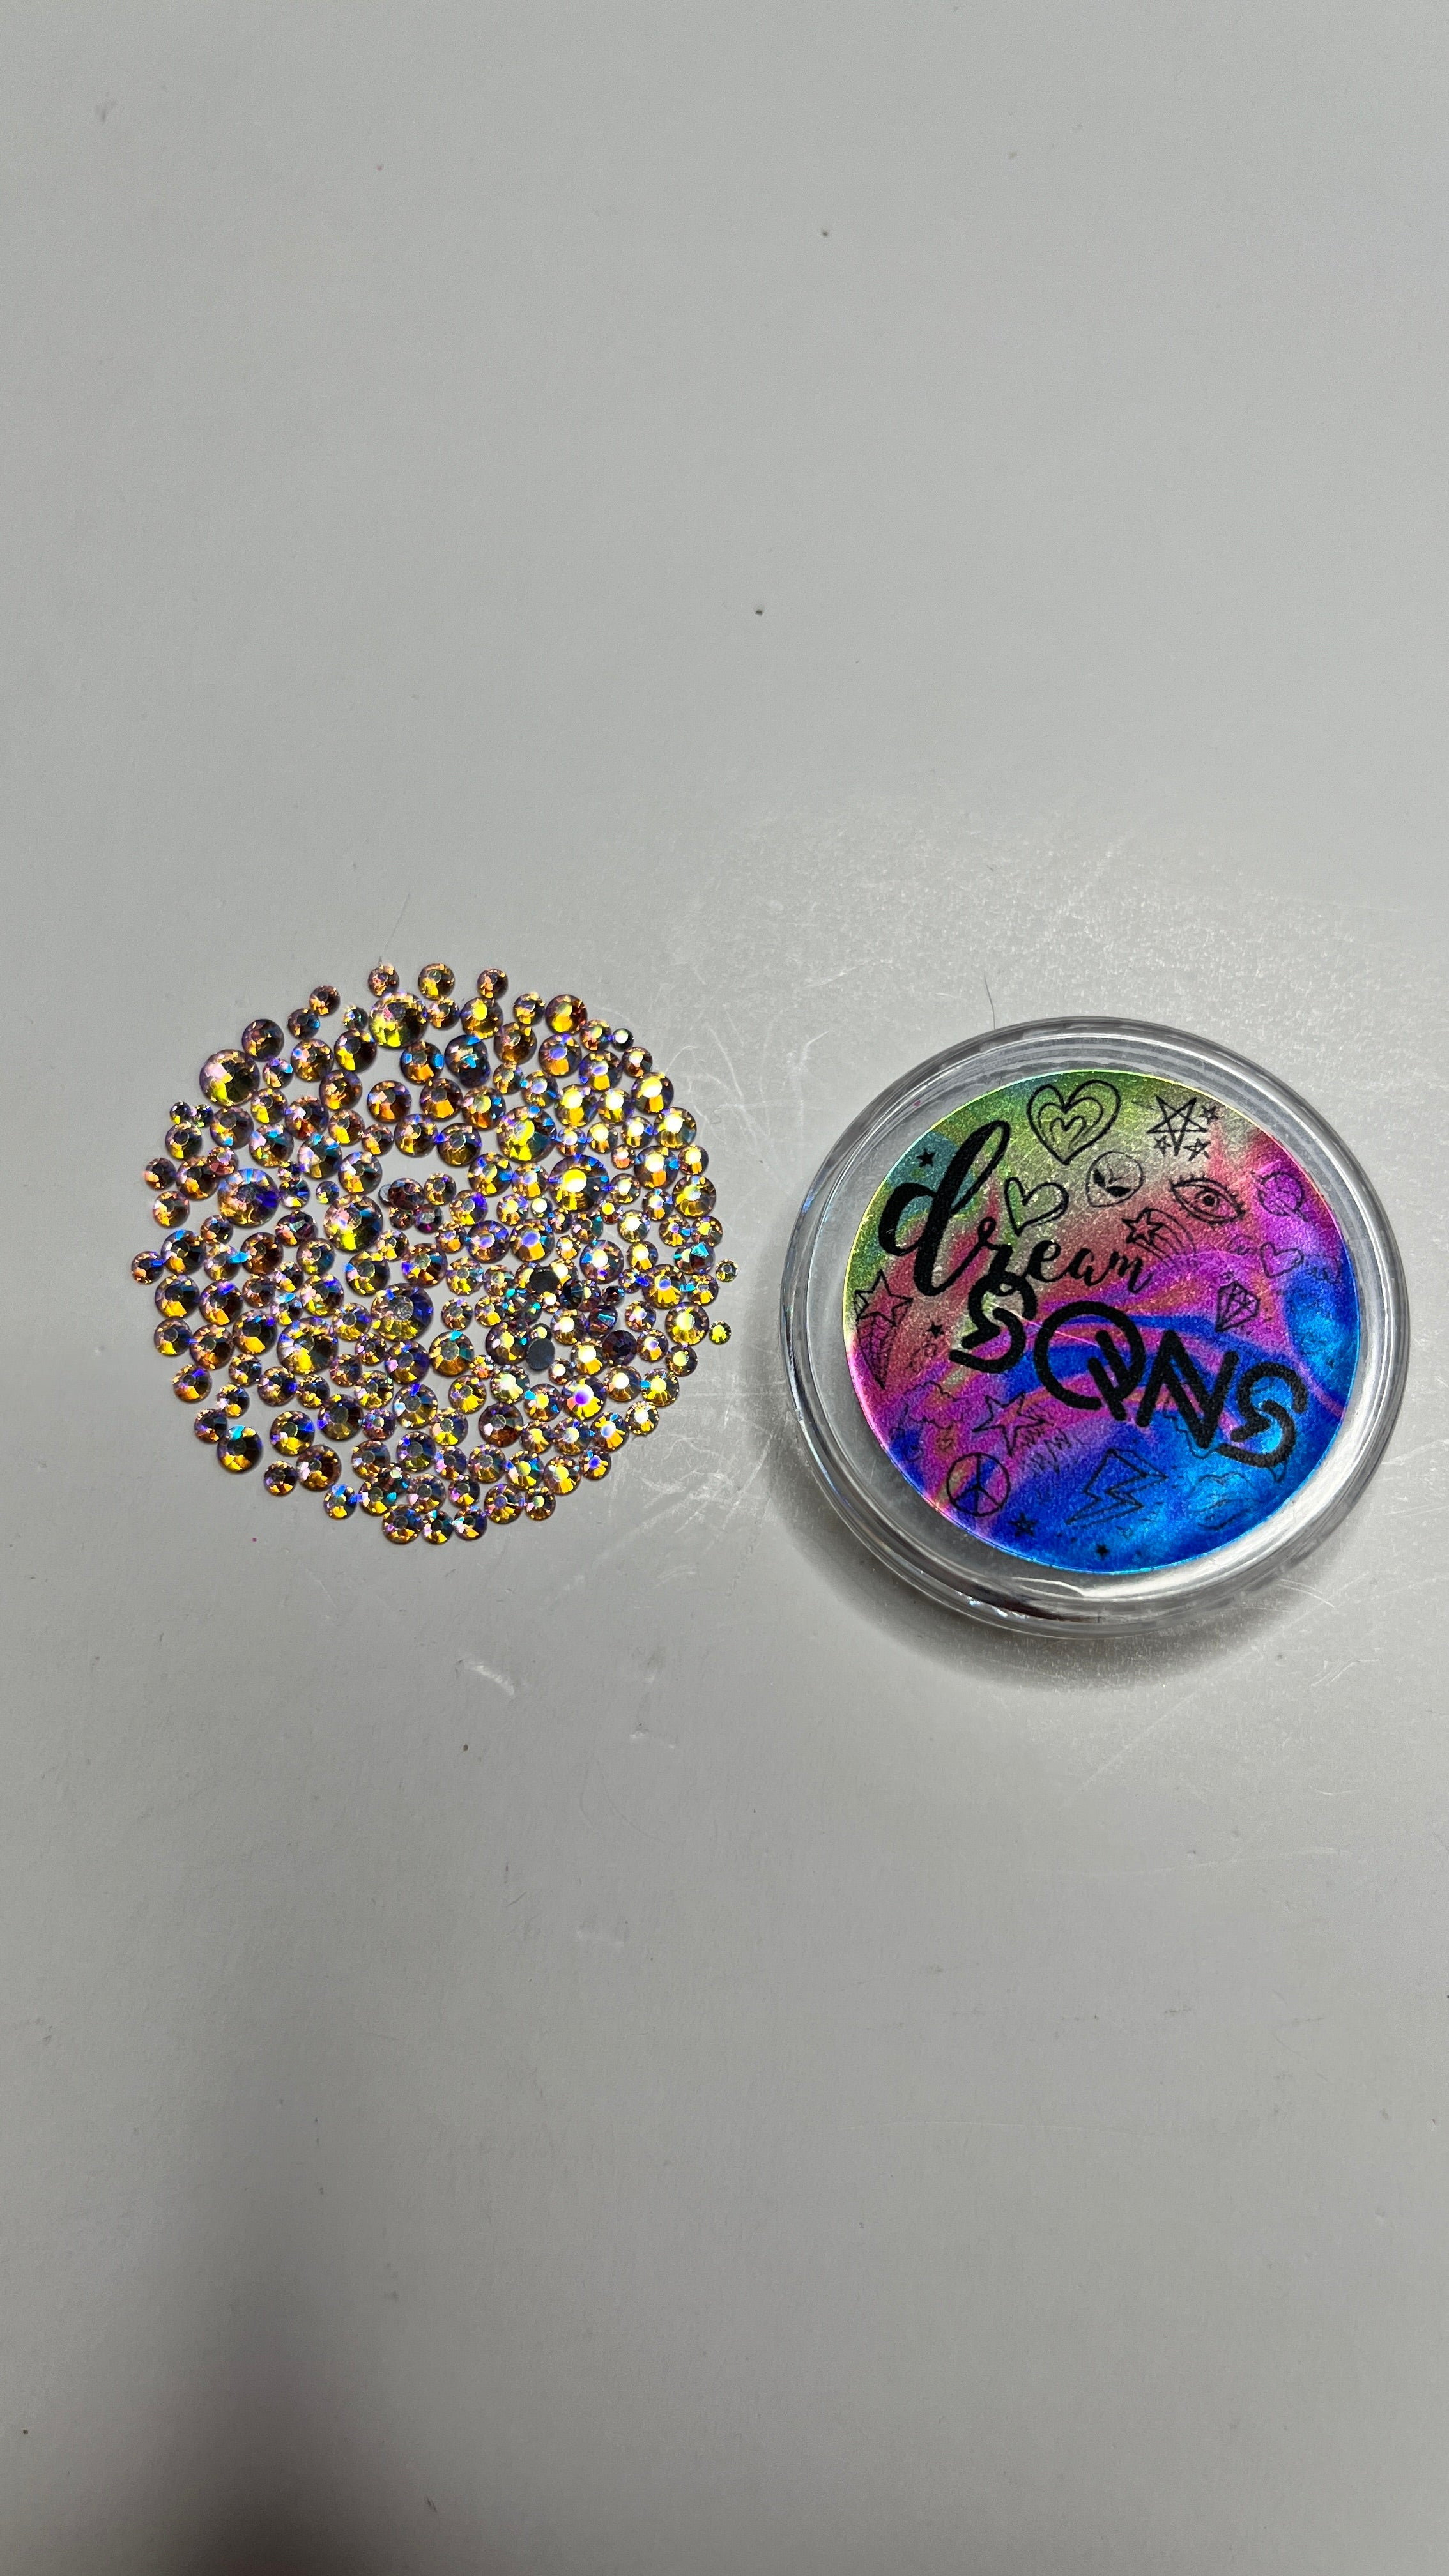 An image of the Ice Cream Crystals by DreamSQNS Glitter next to the lid